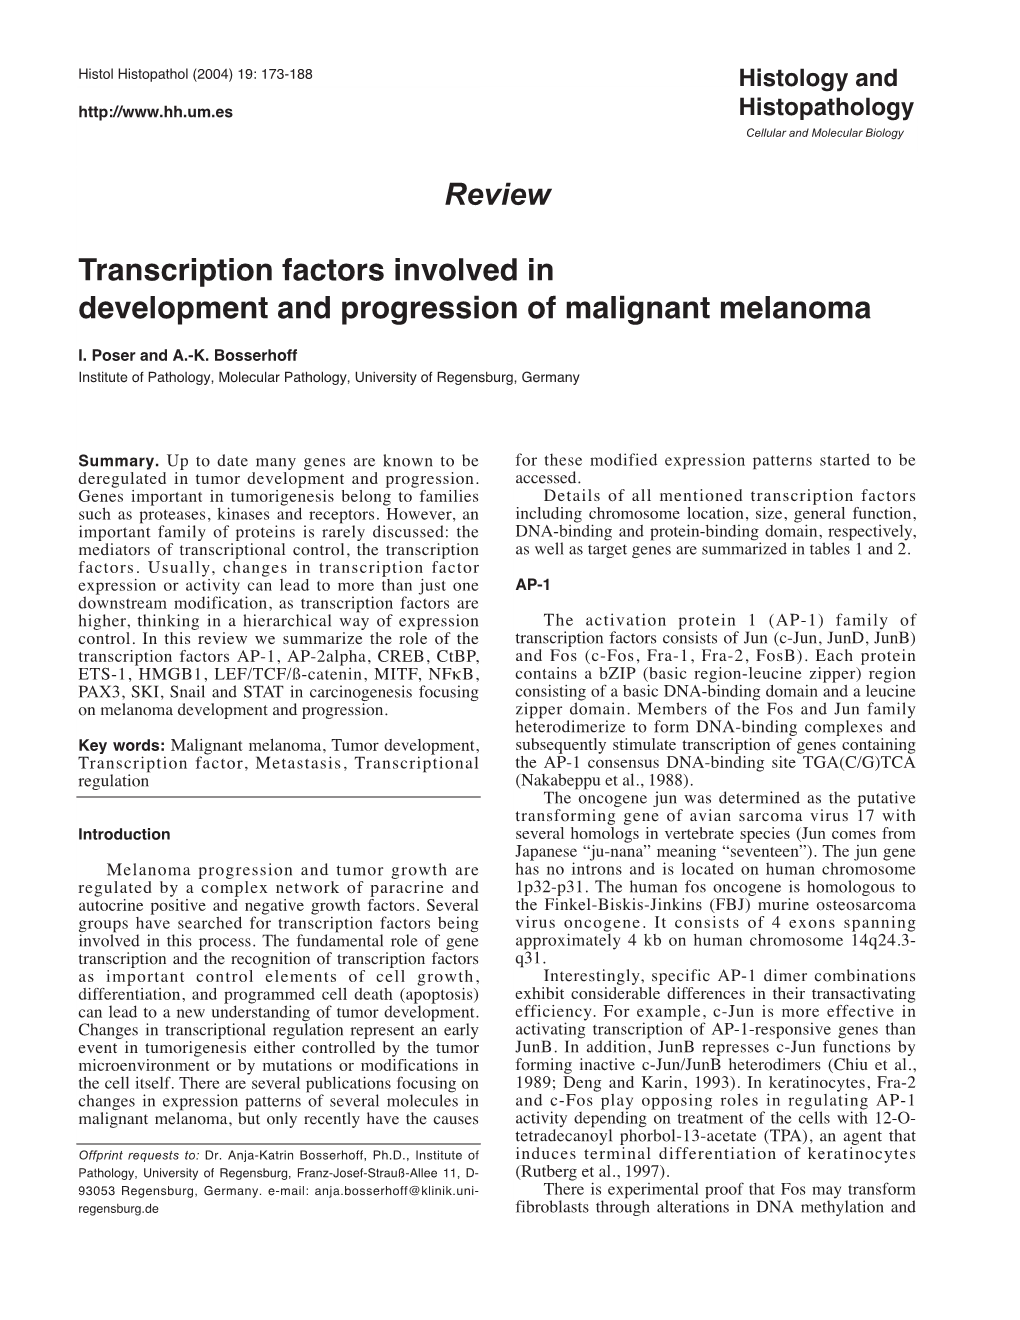 Review Transcription Factors Involved in Development and Progression Of